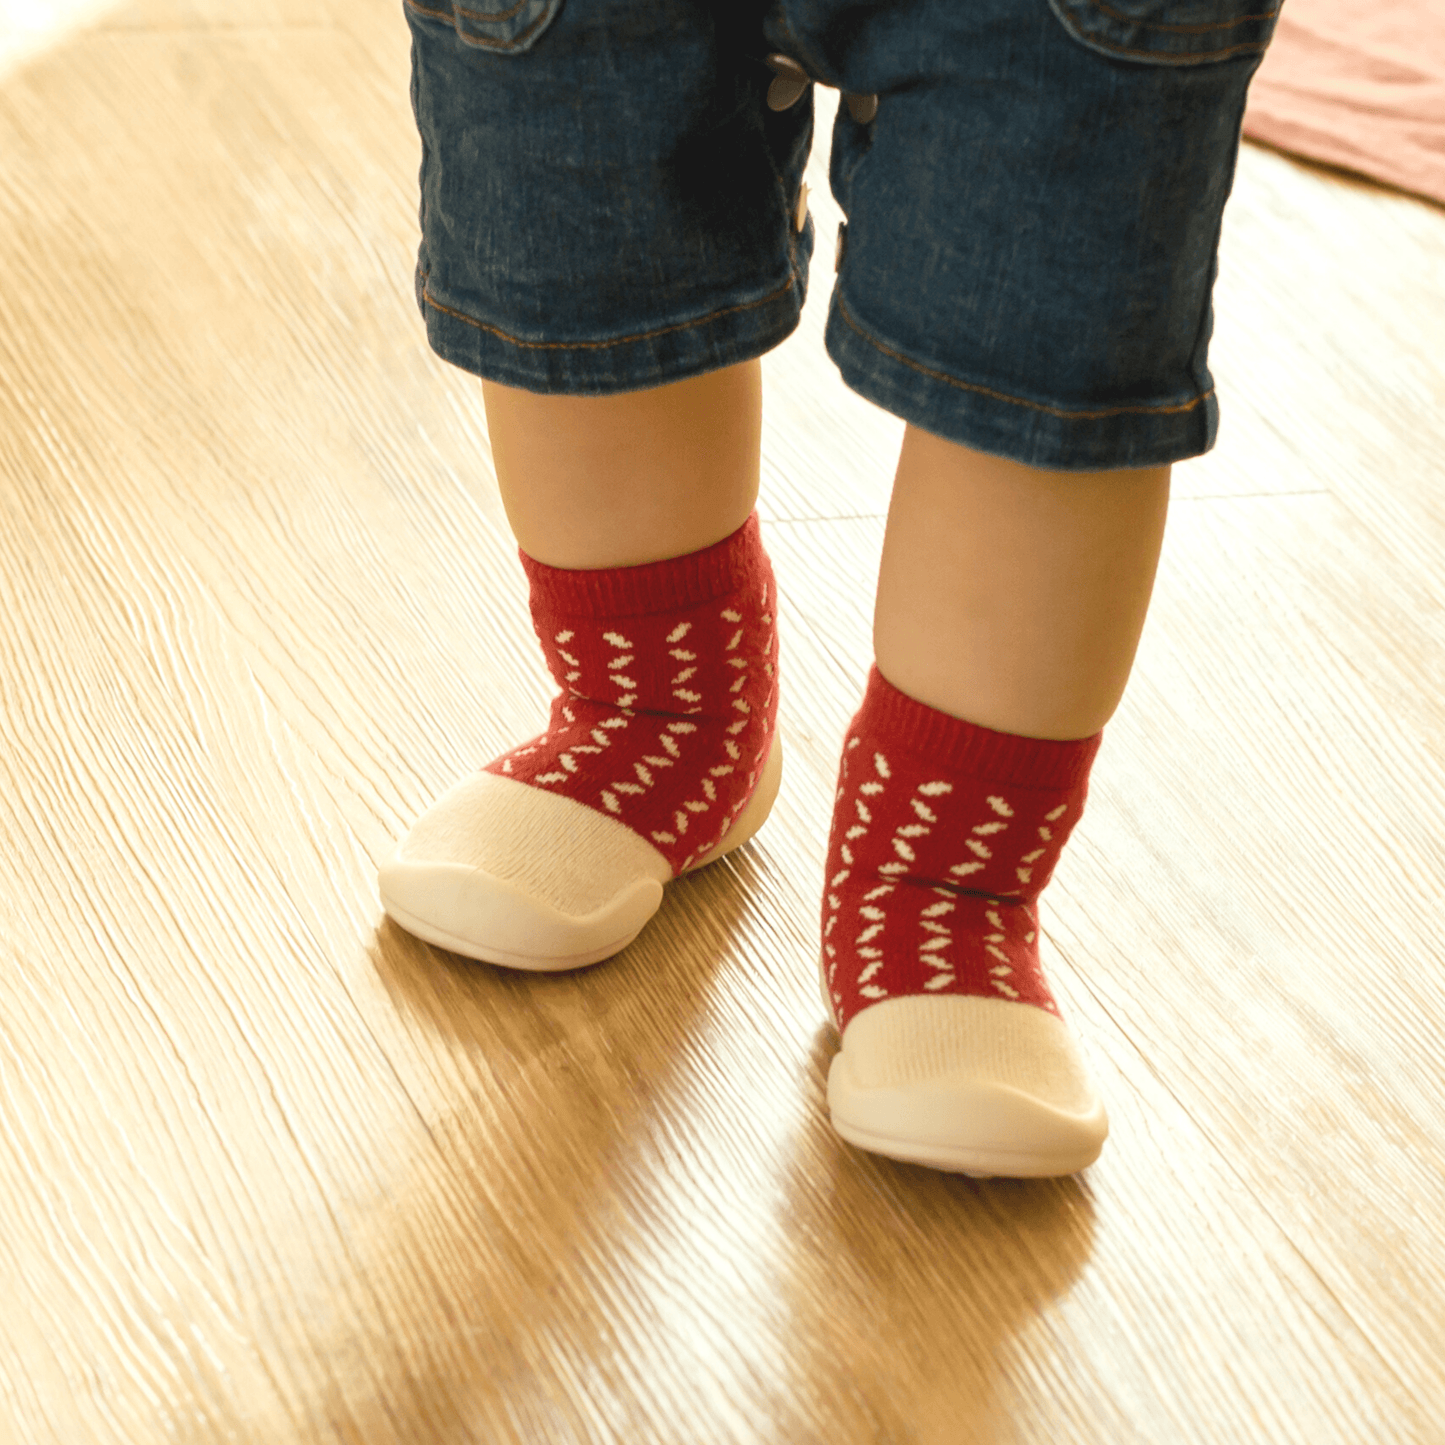 Komuello Winter Knit Lover Baby Rubber Sole Sock Shoes Komuello Winter Knit Lover Baby Rubber Sole Sock Shoes 